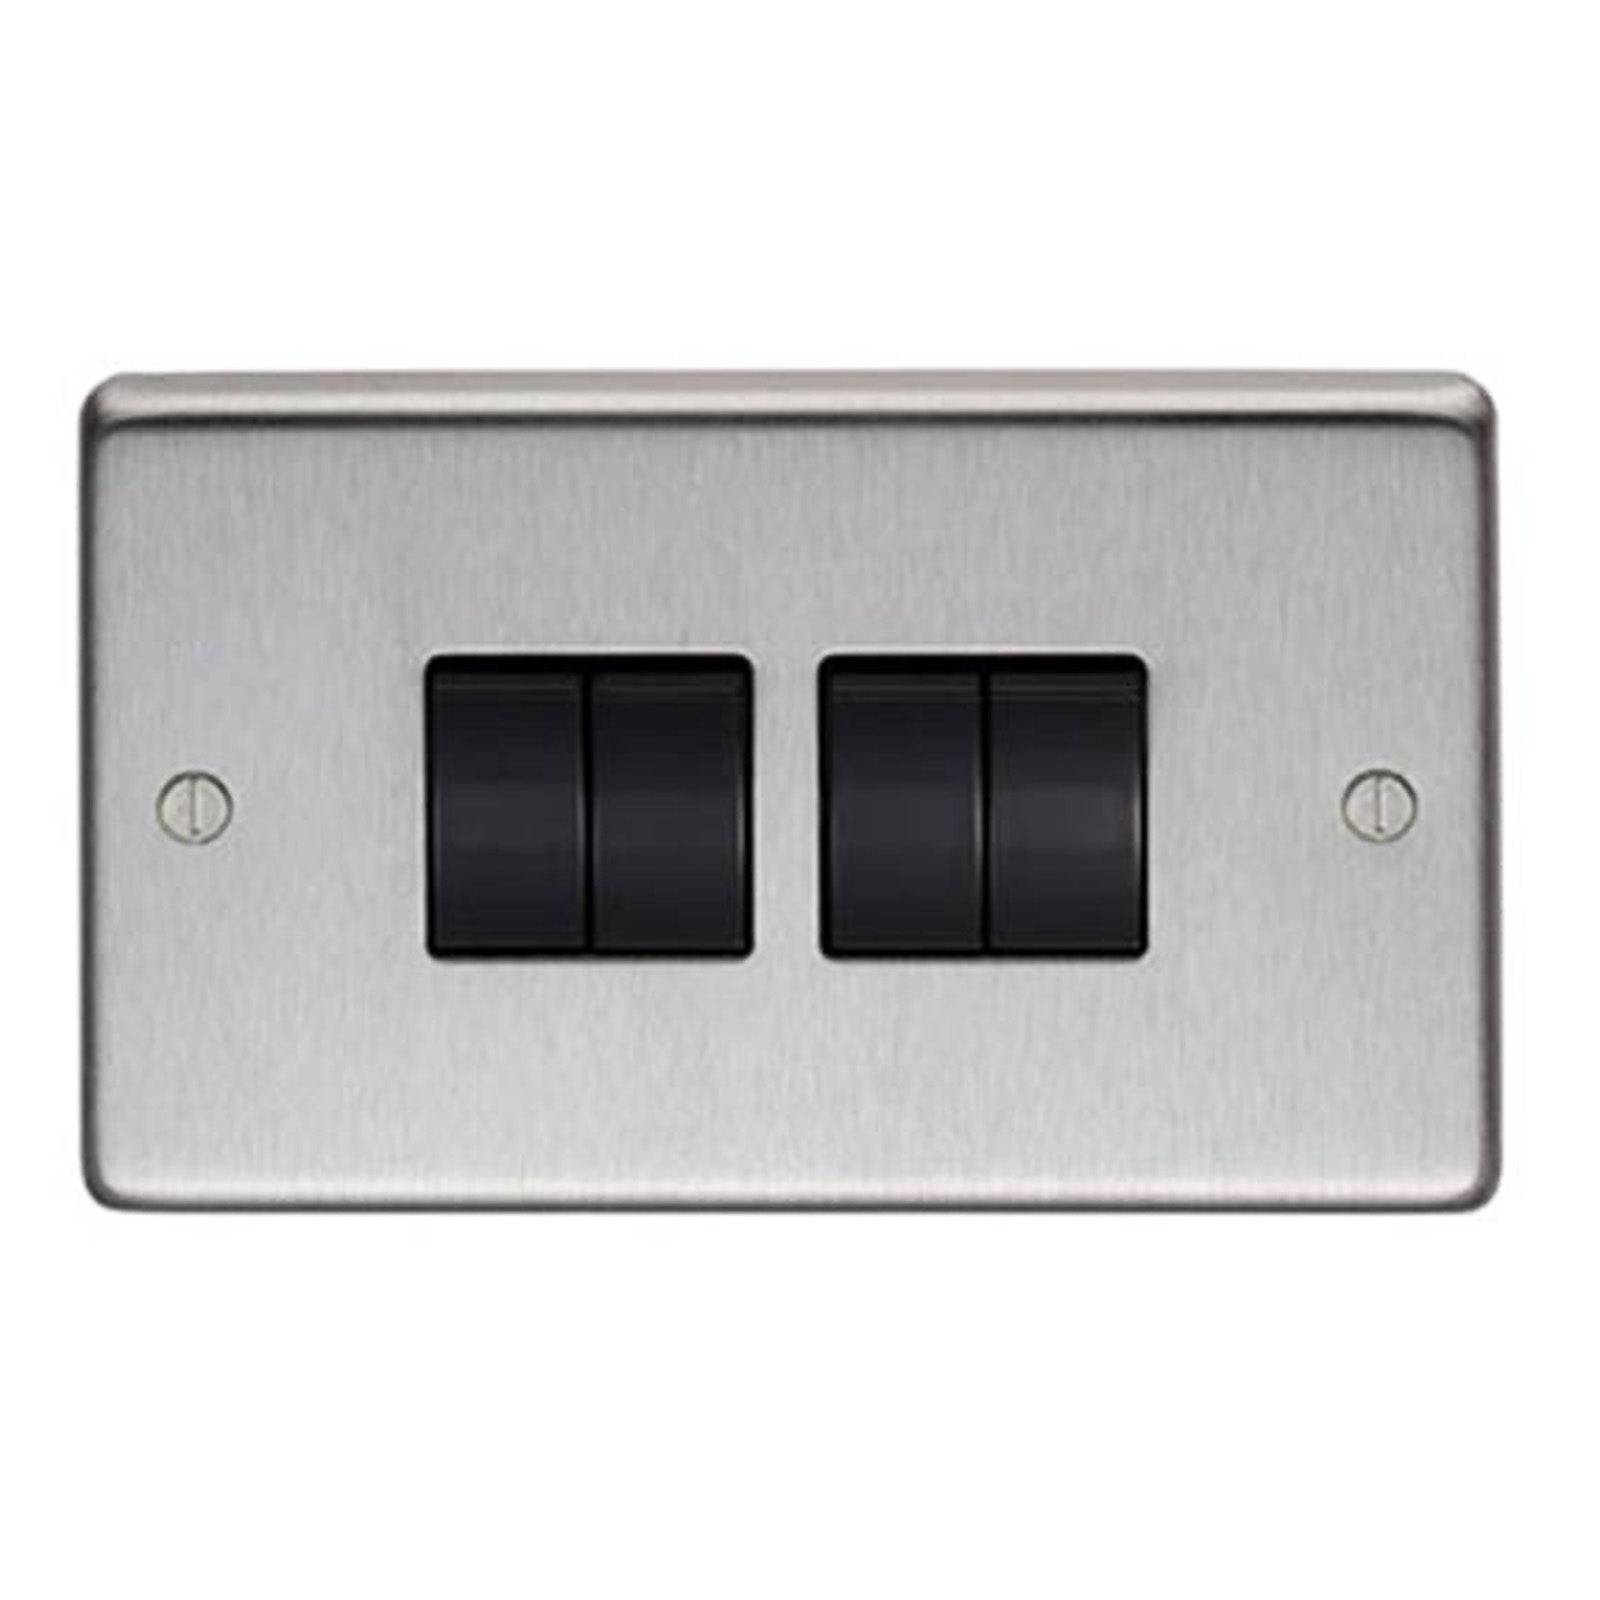 SHOW Image of Quad 10 Amp Switch with Satin Stainless Steel finish